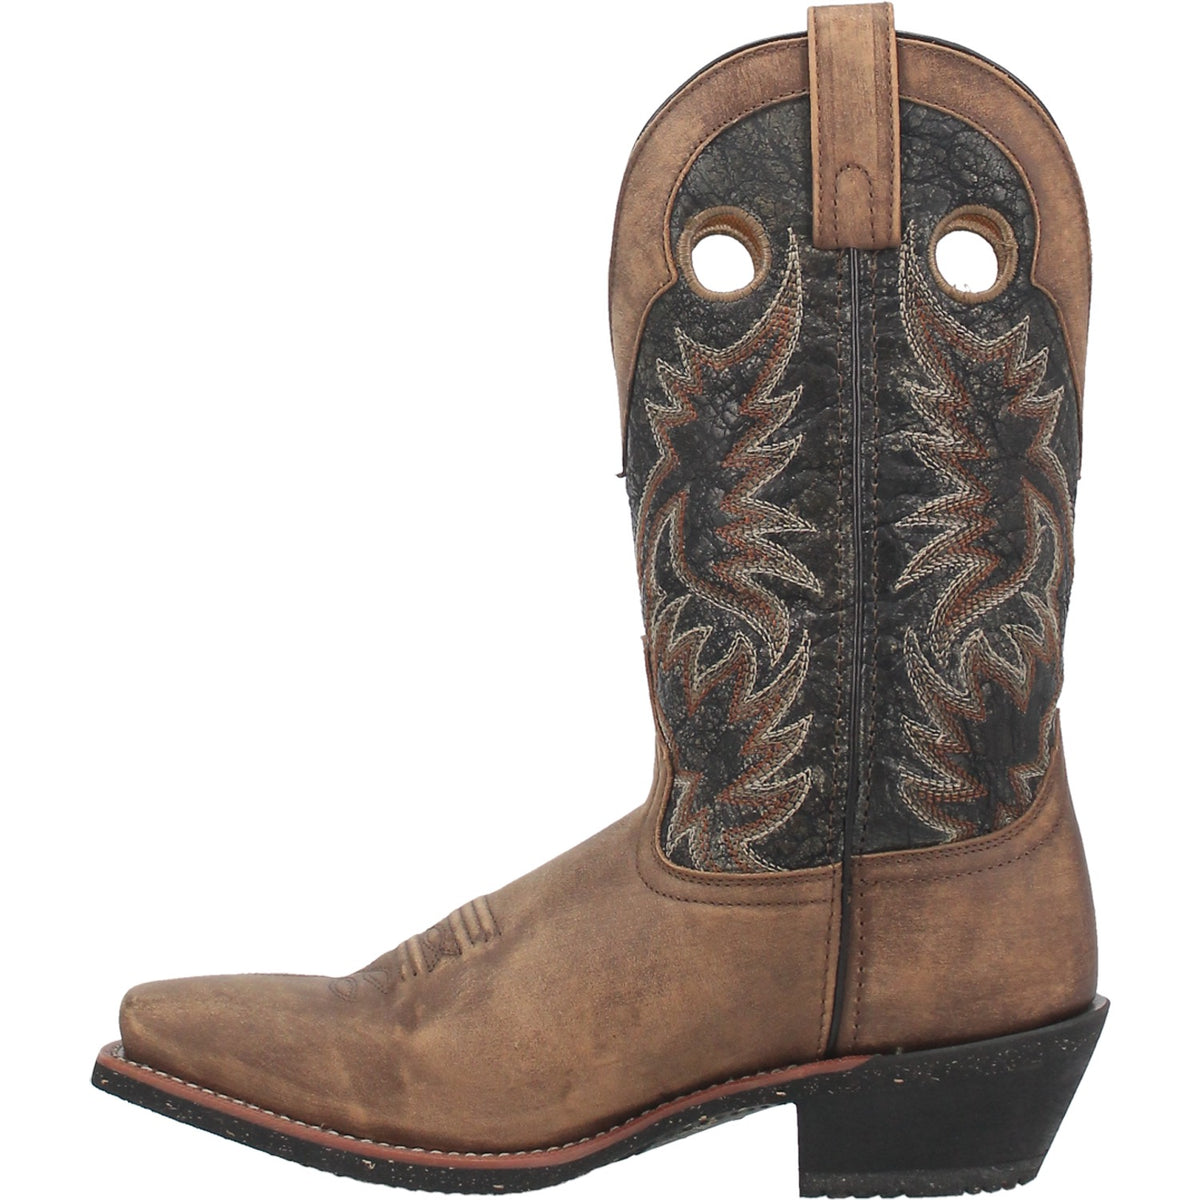 STILLWATER LEATHER BOOT Cover